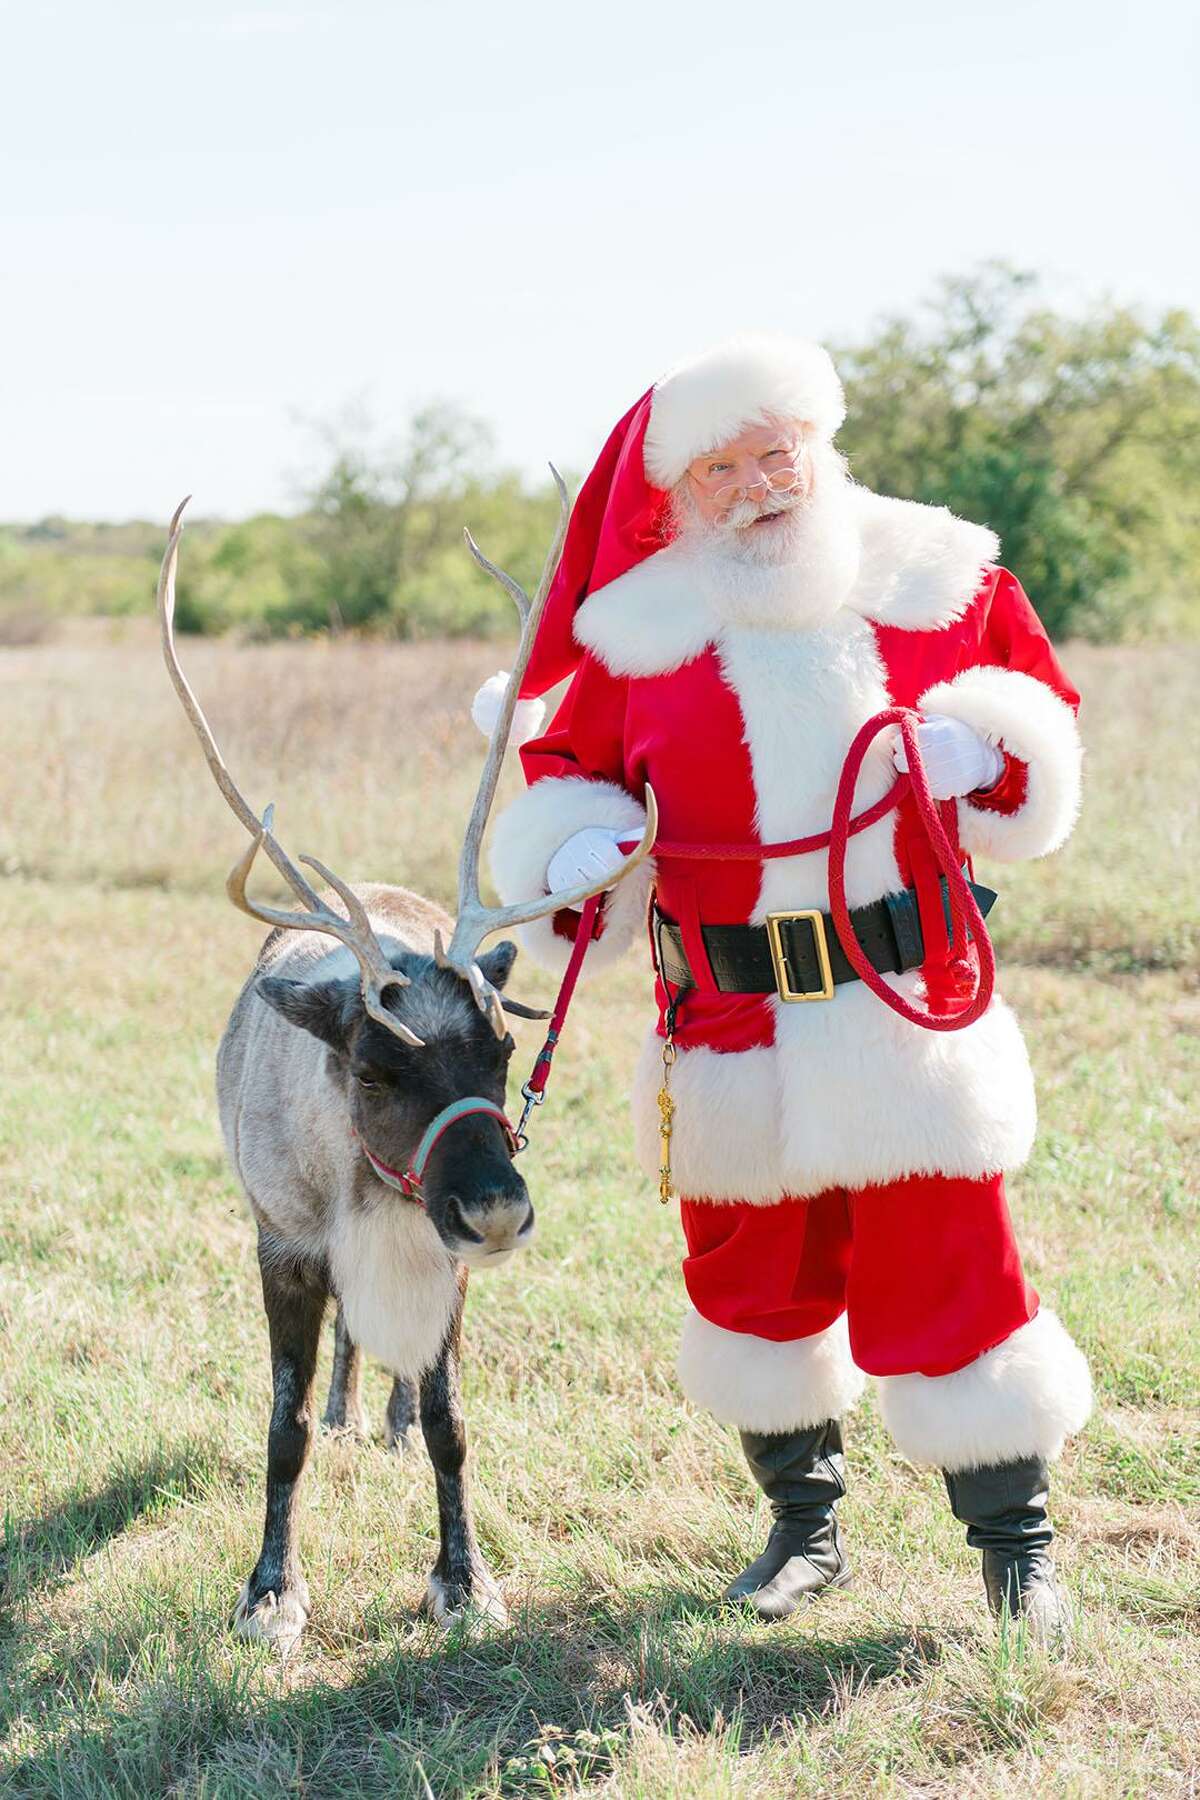 Santa Claus is expected to stop on Saturday, Nov. 26, by CityCentre at 800 Town & Country Blvd. in west Houston